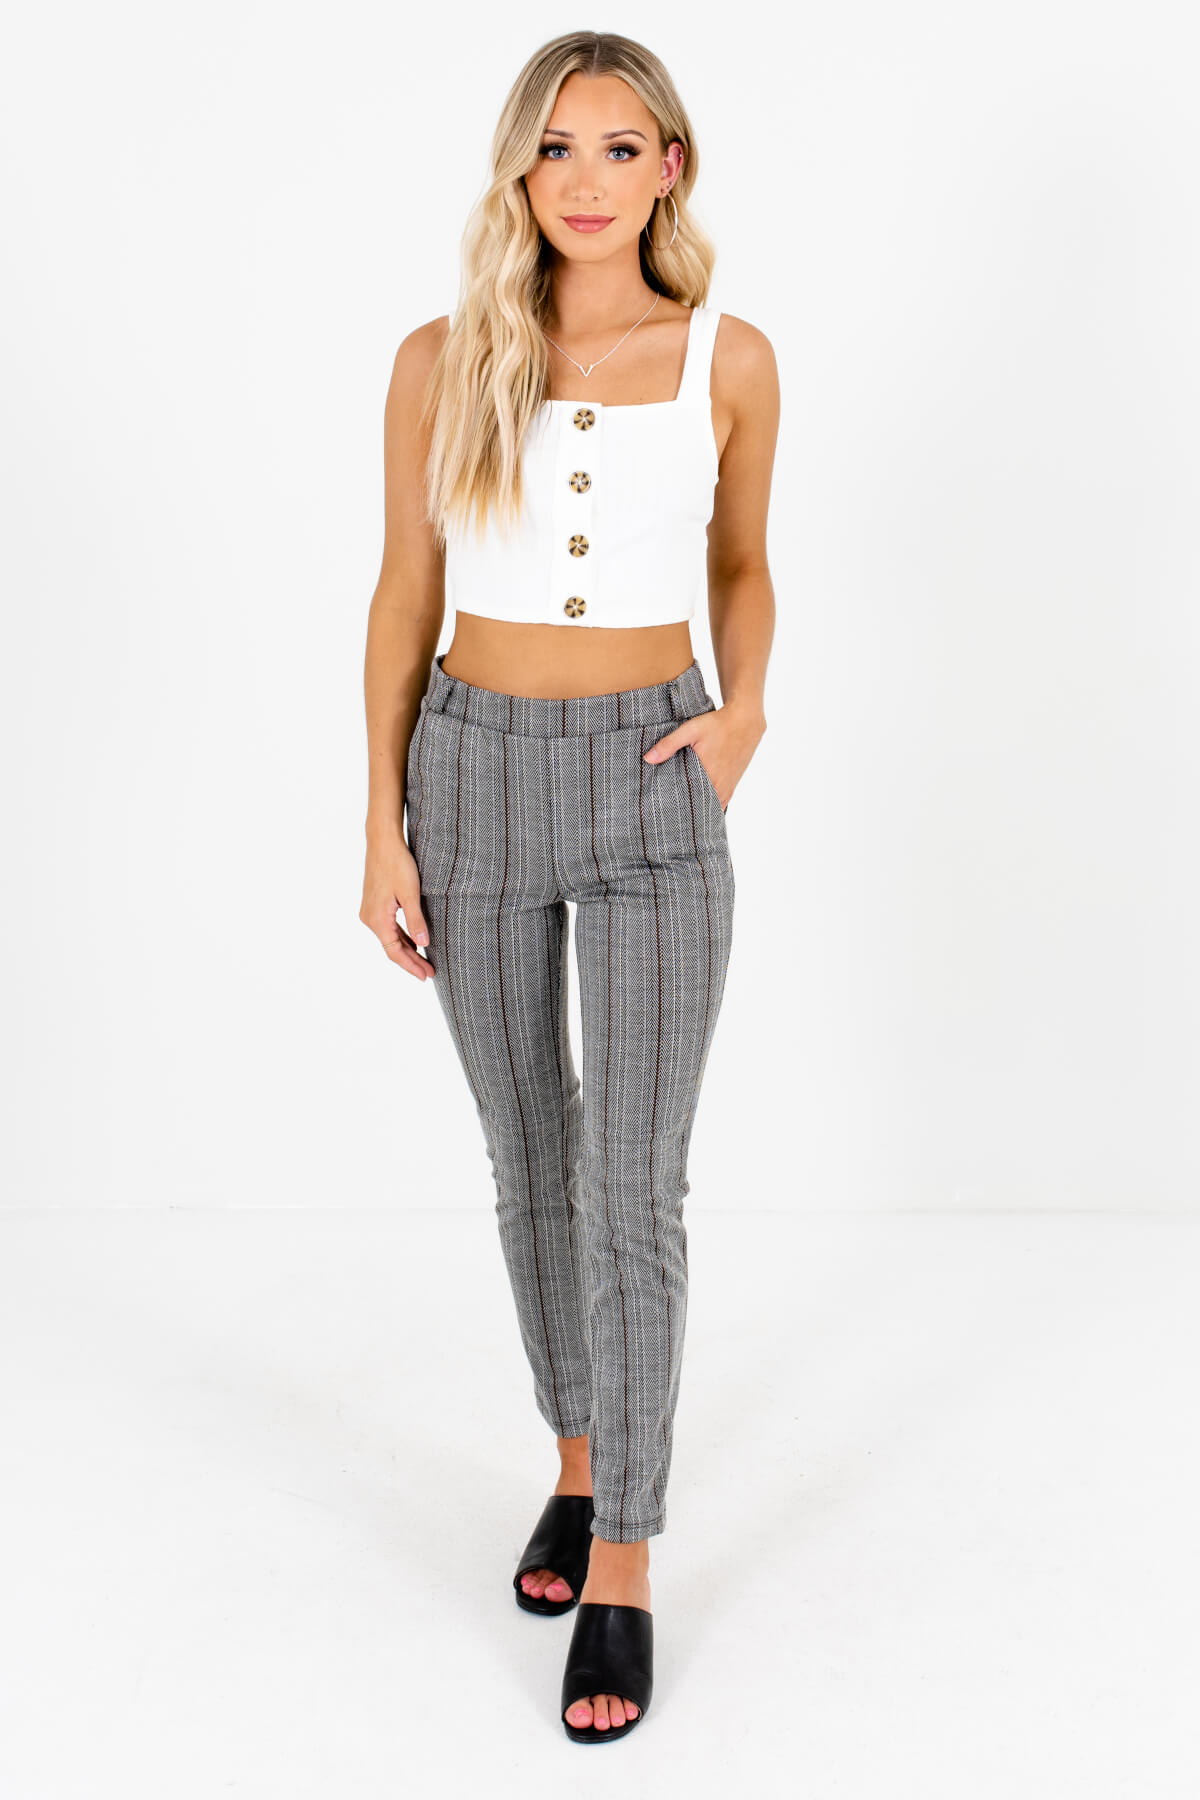 Women's Gray High-Quality Stretchy Boutique Pants